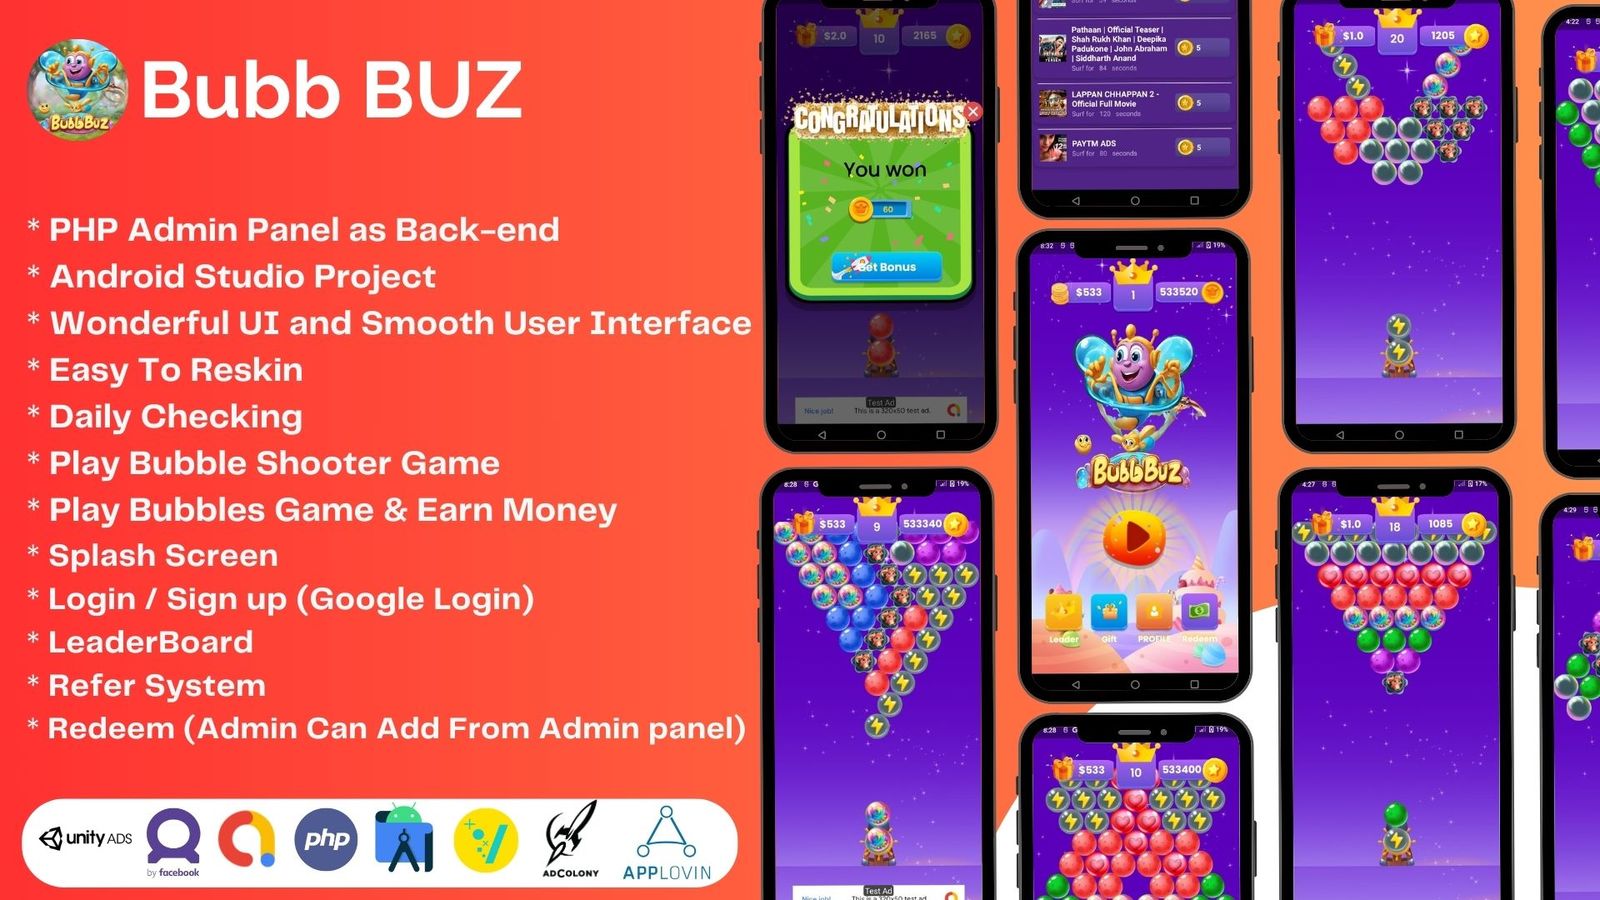 Bubb Buz Bubble Shooter Game - Android Studio Project - 5